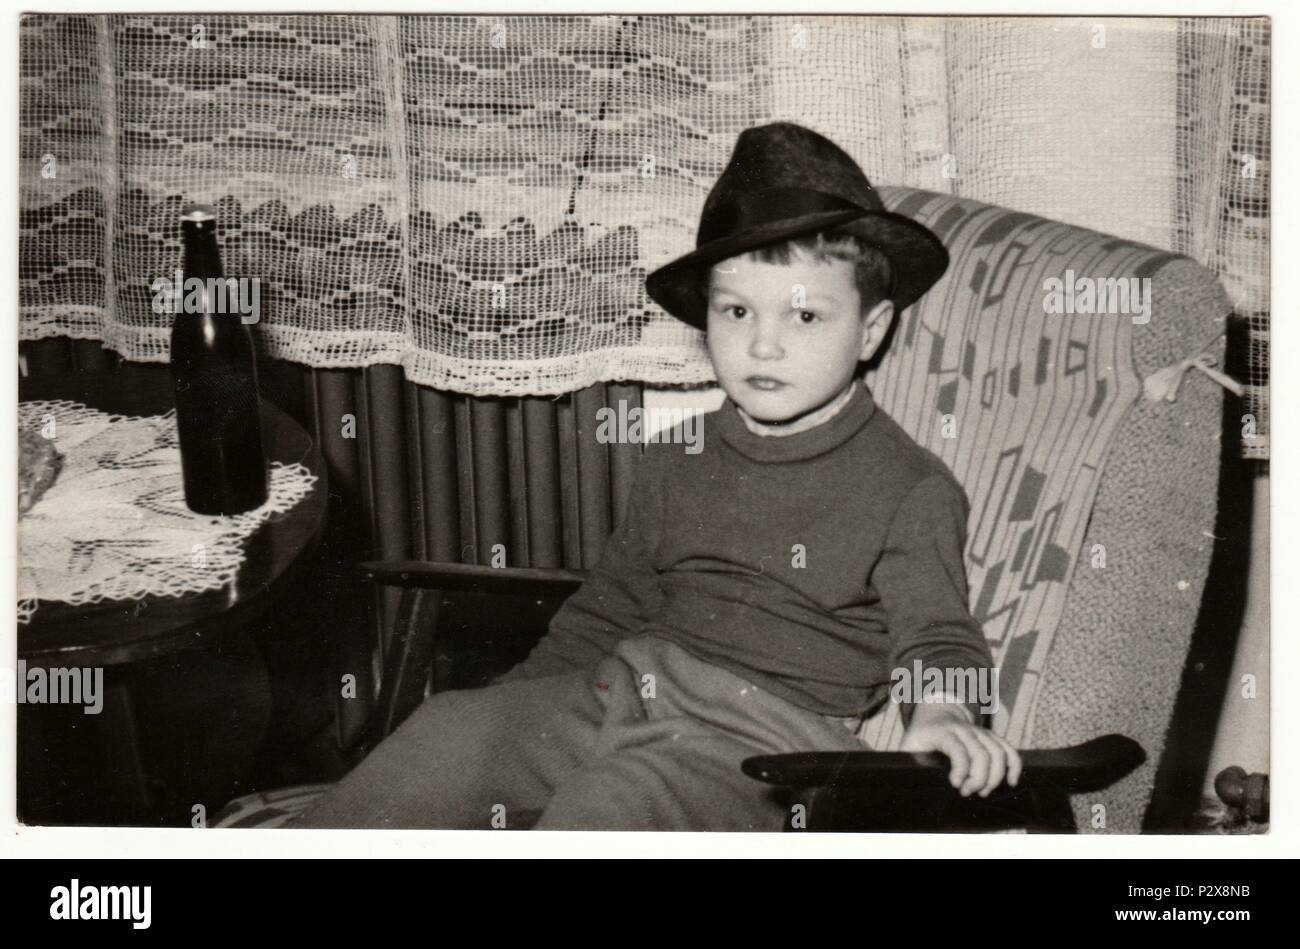 THE CZECHOSLOVAK SOCIALIST REPUBLIC - FEBRUARY 1, 1967: Vintage photo shows a small boy with a bottle of beer. Funny and cute photo of boy. Retro black & white  photography. Stock Photo